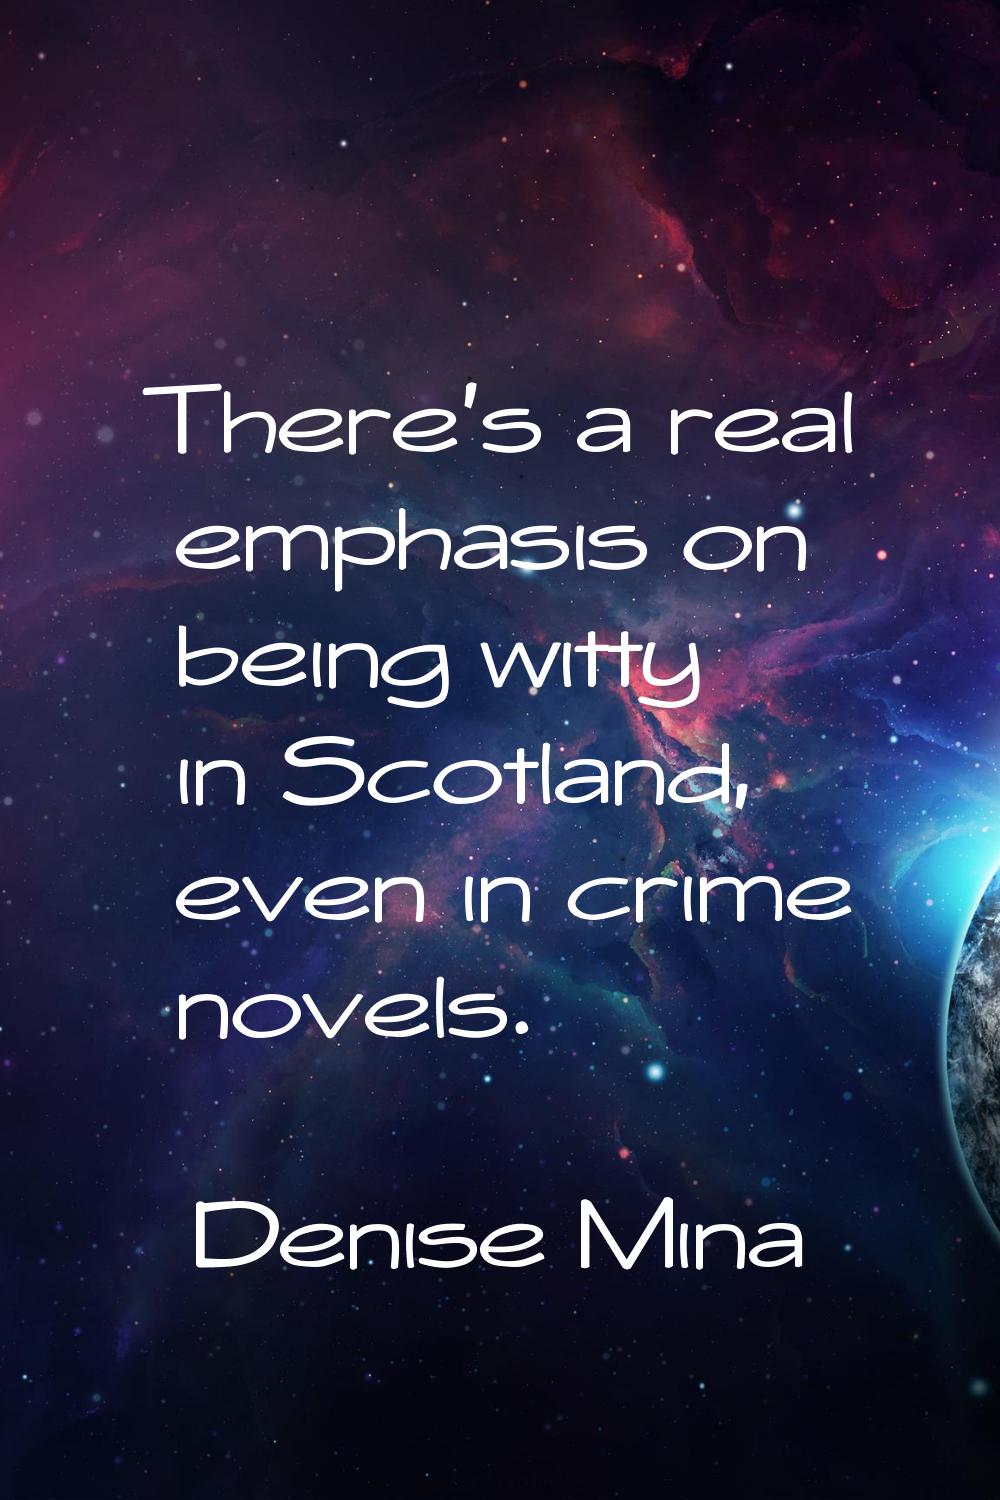 There's a real emphasis on being witty in Scotland, even in crime novels.